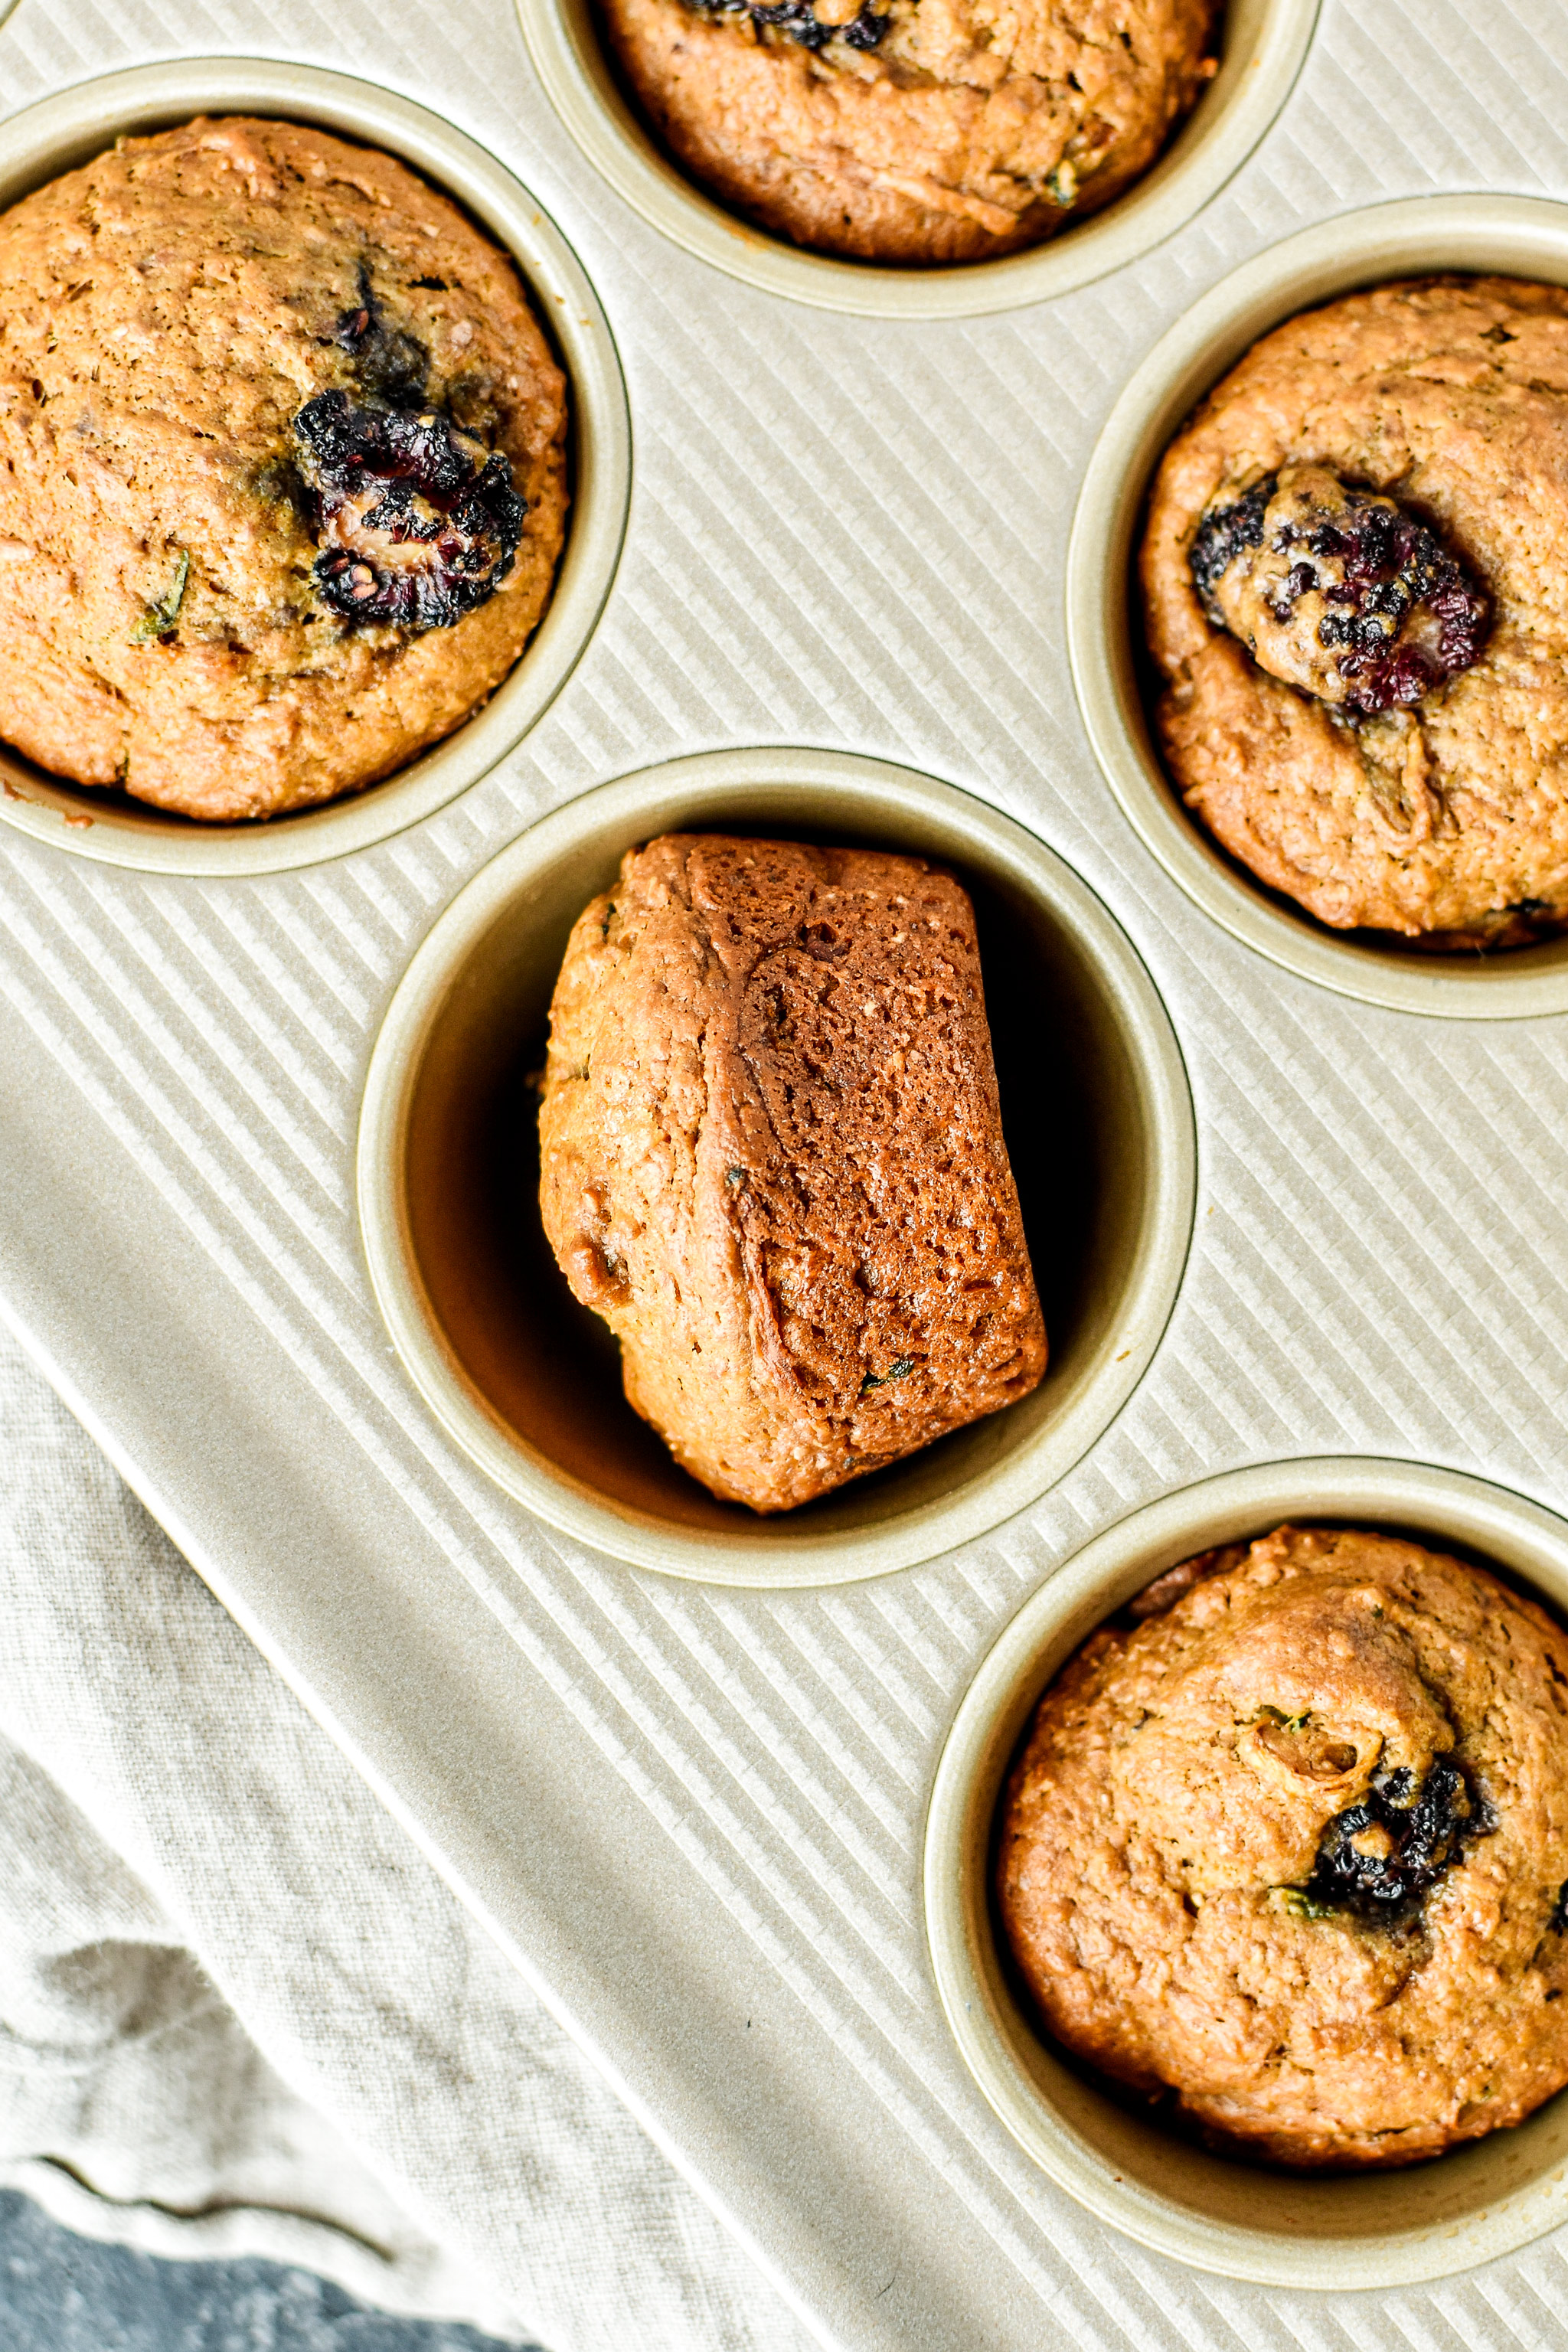 A fresh batch of Blackberry Bran Muffins made in the OXO pro muffin tin.